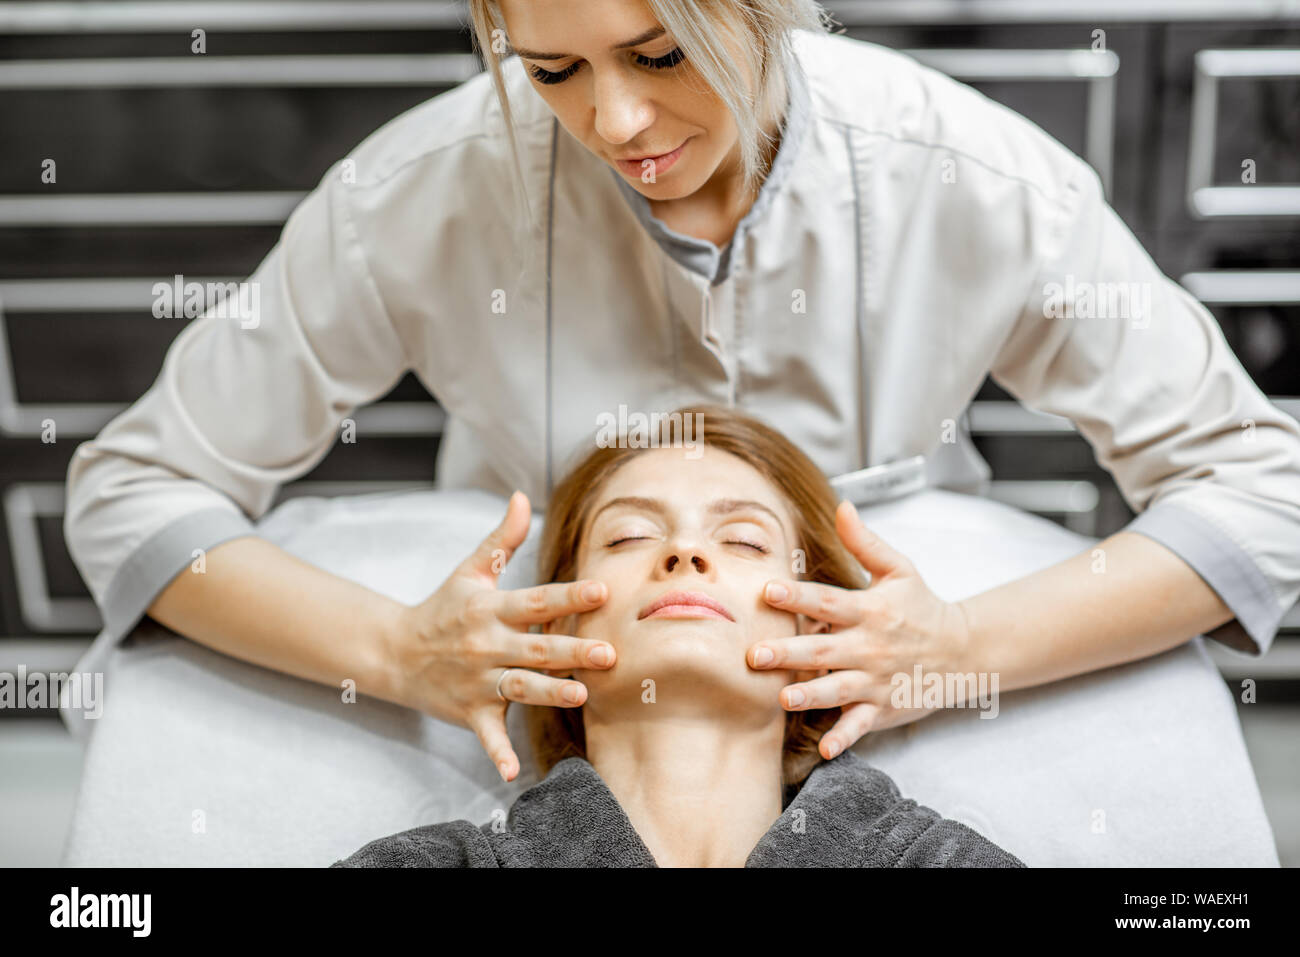 Cosmetologist Making Facial Massage To A Beautiful Woman At The Beauty Salon Concept Of A Lymph